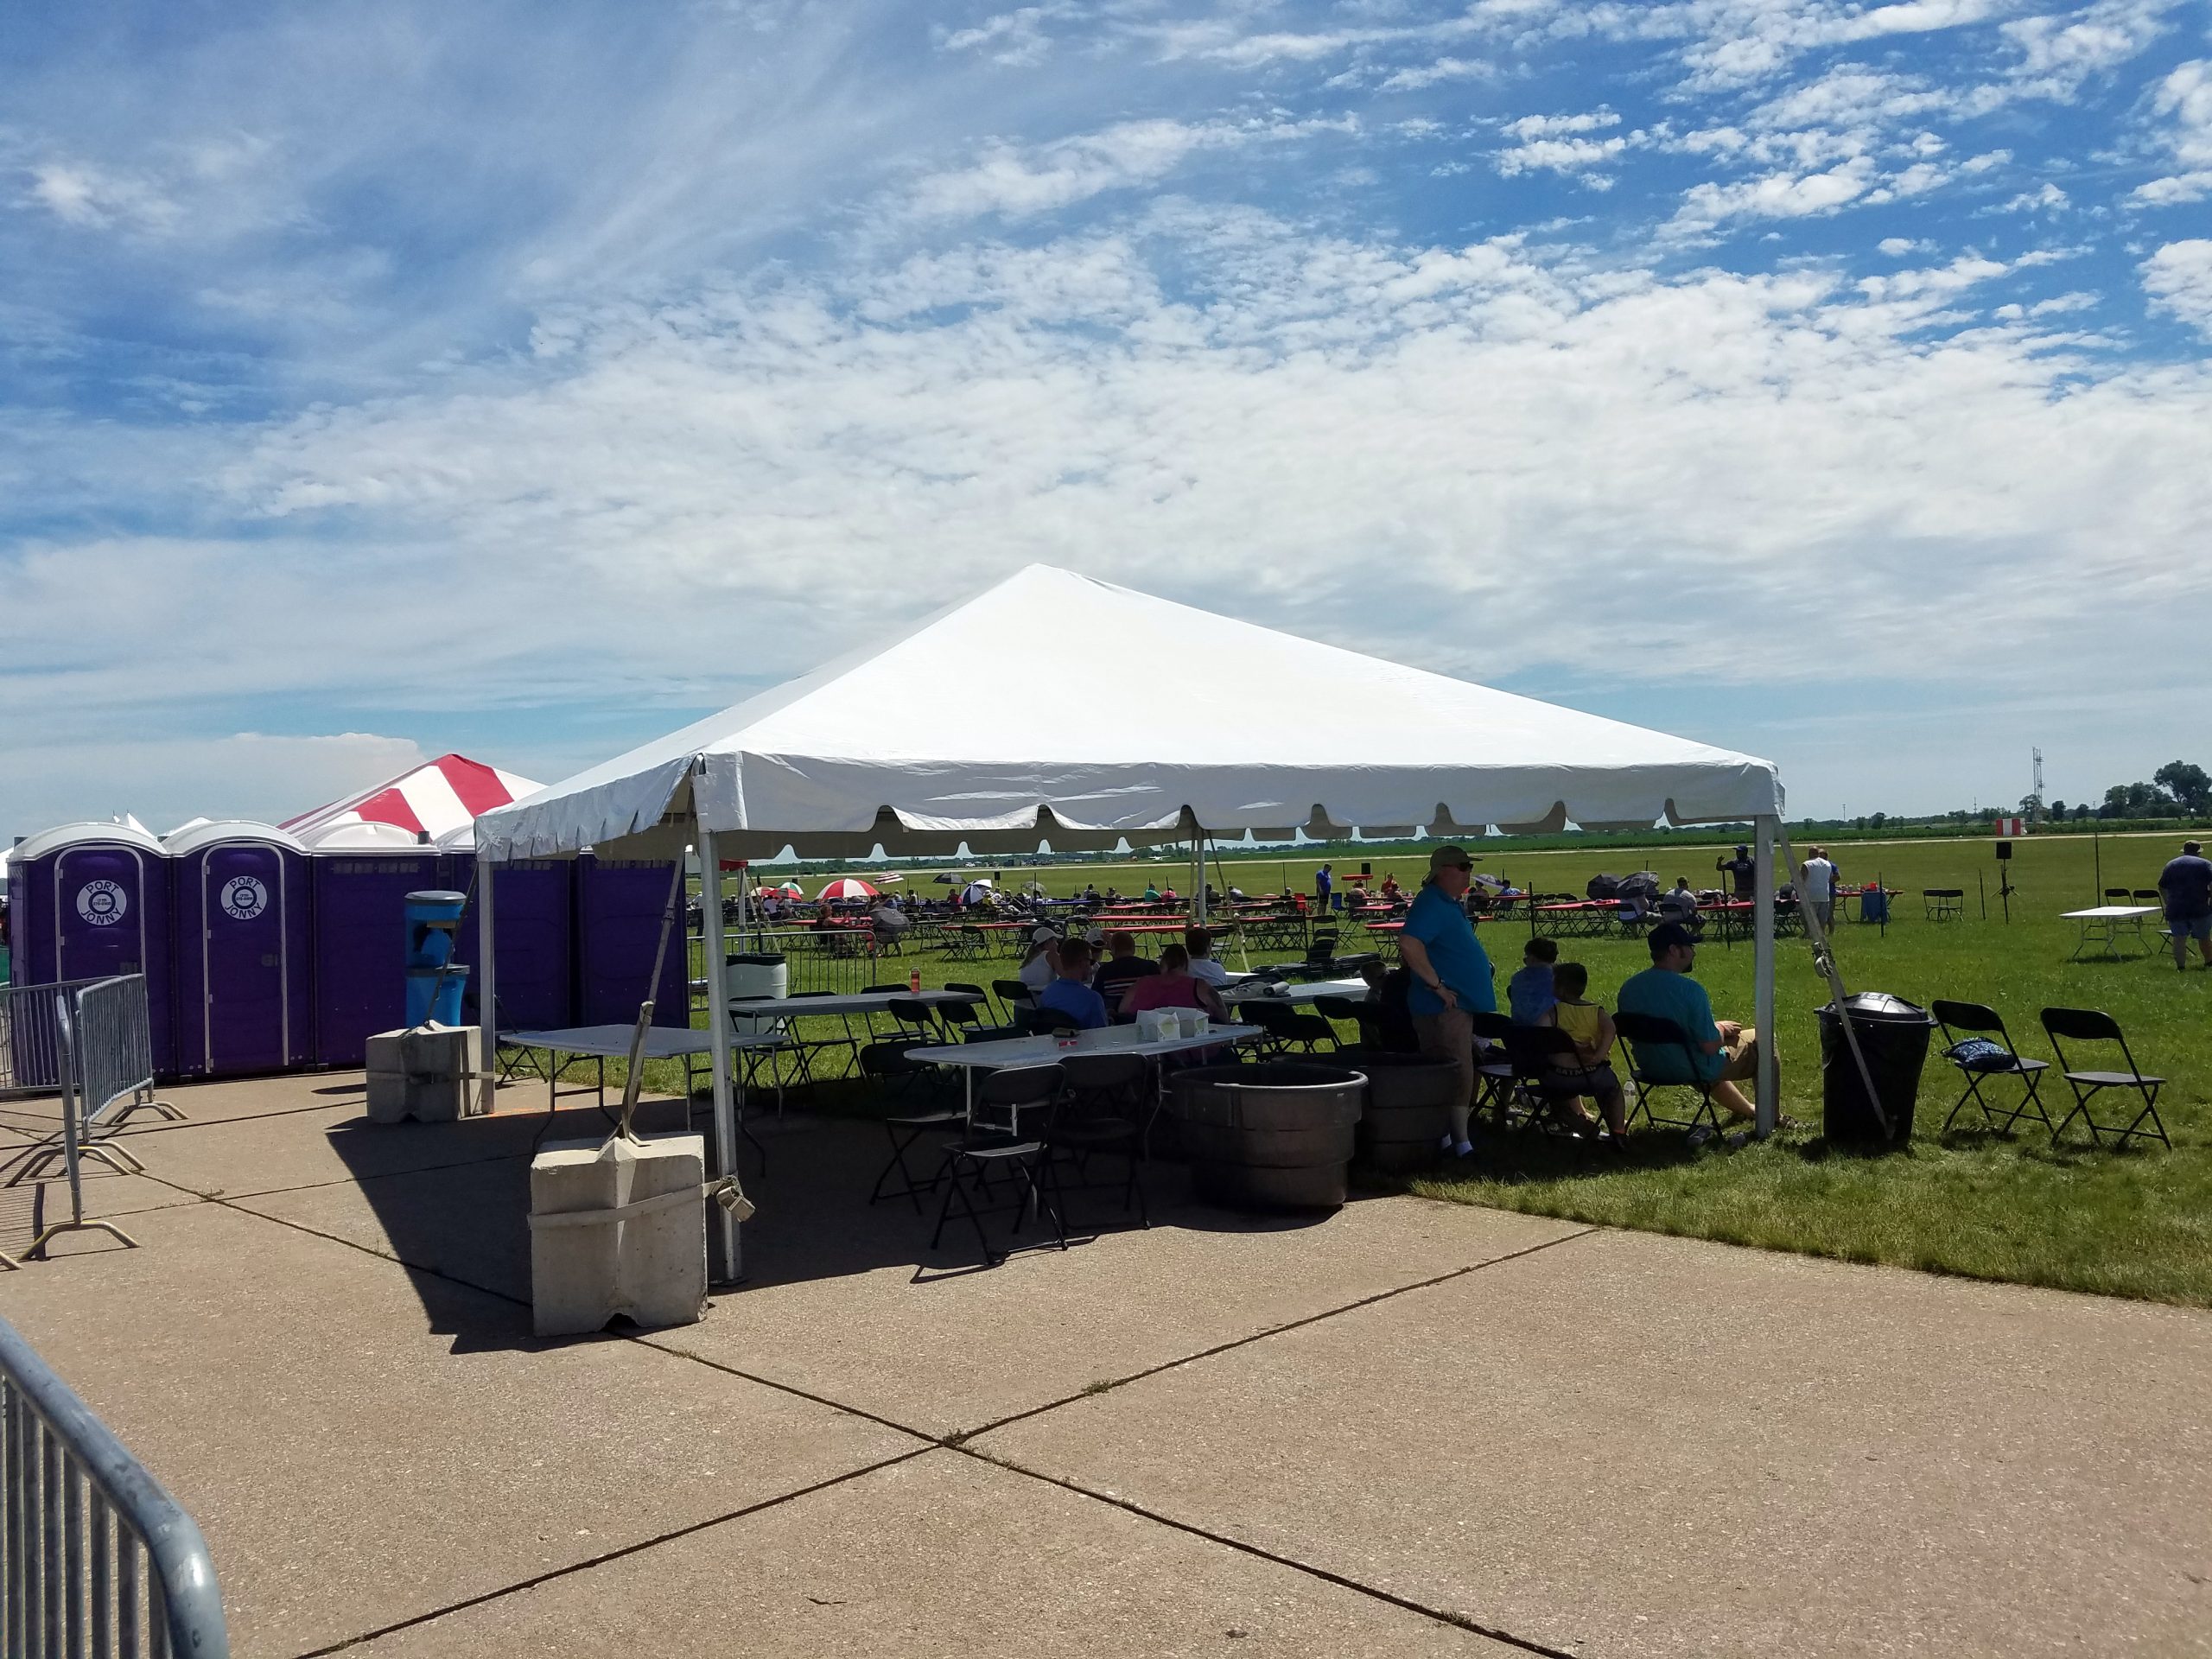 20' x 20' Frame tent at the 2016 Quad Cities Air Show